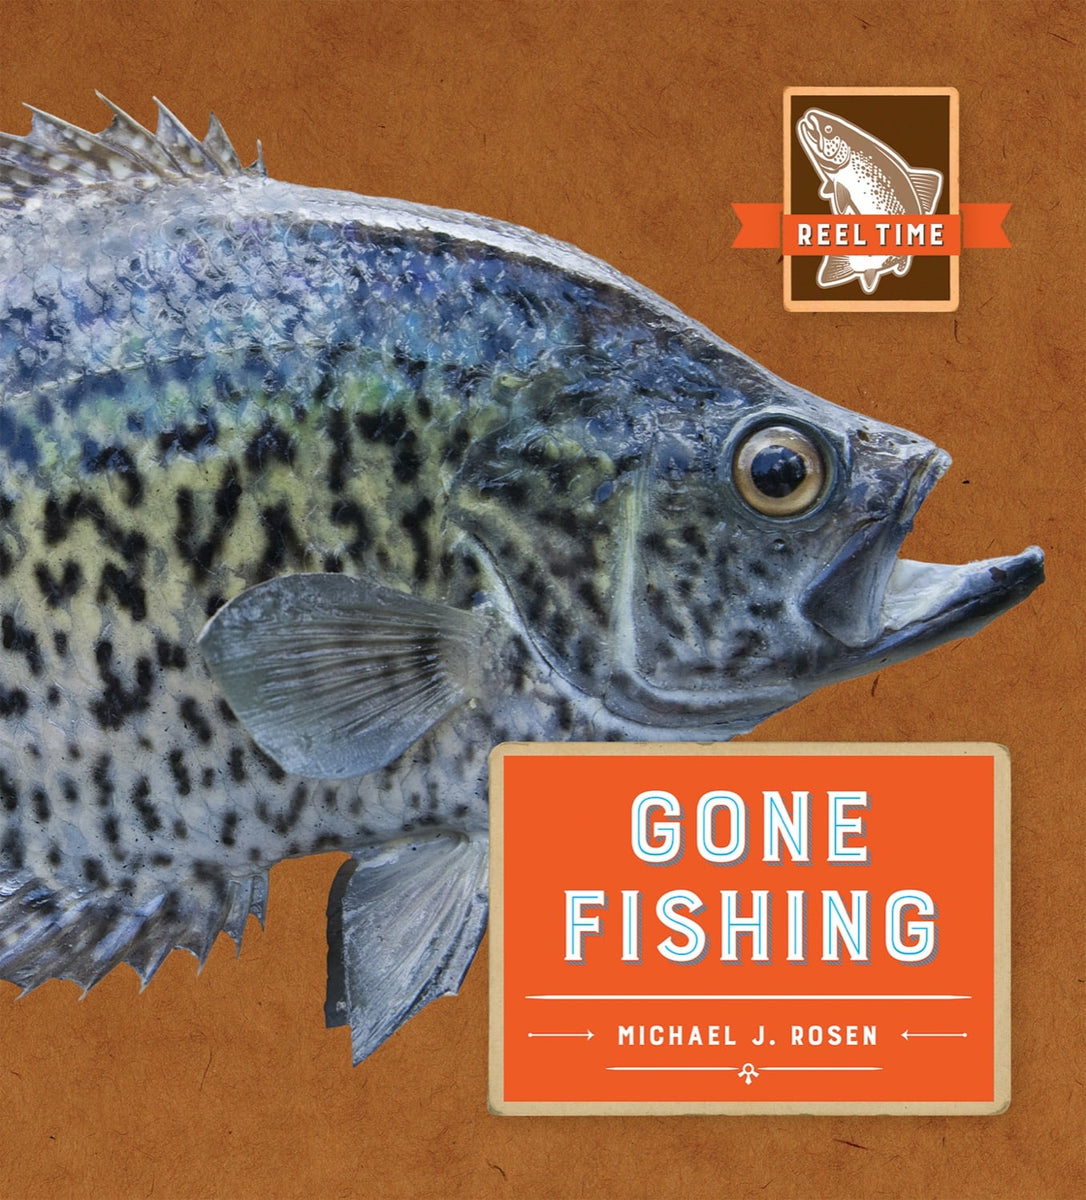 Reel Time: Gone Fishing [Book]